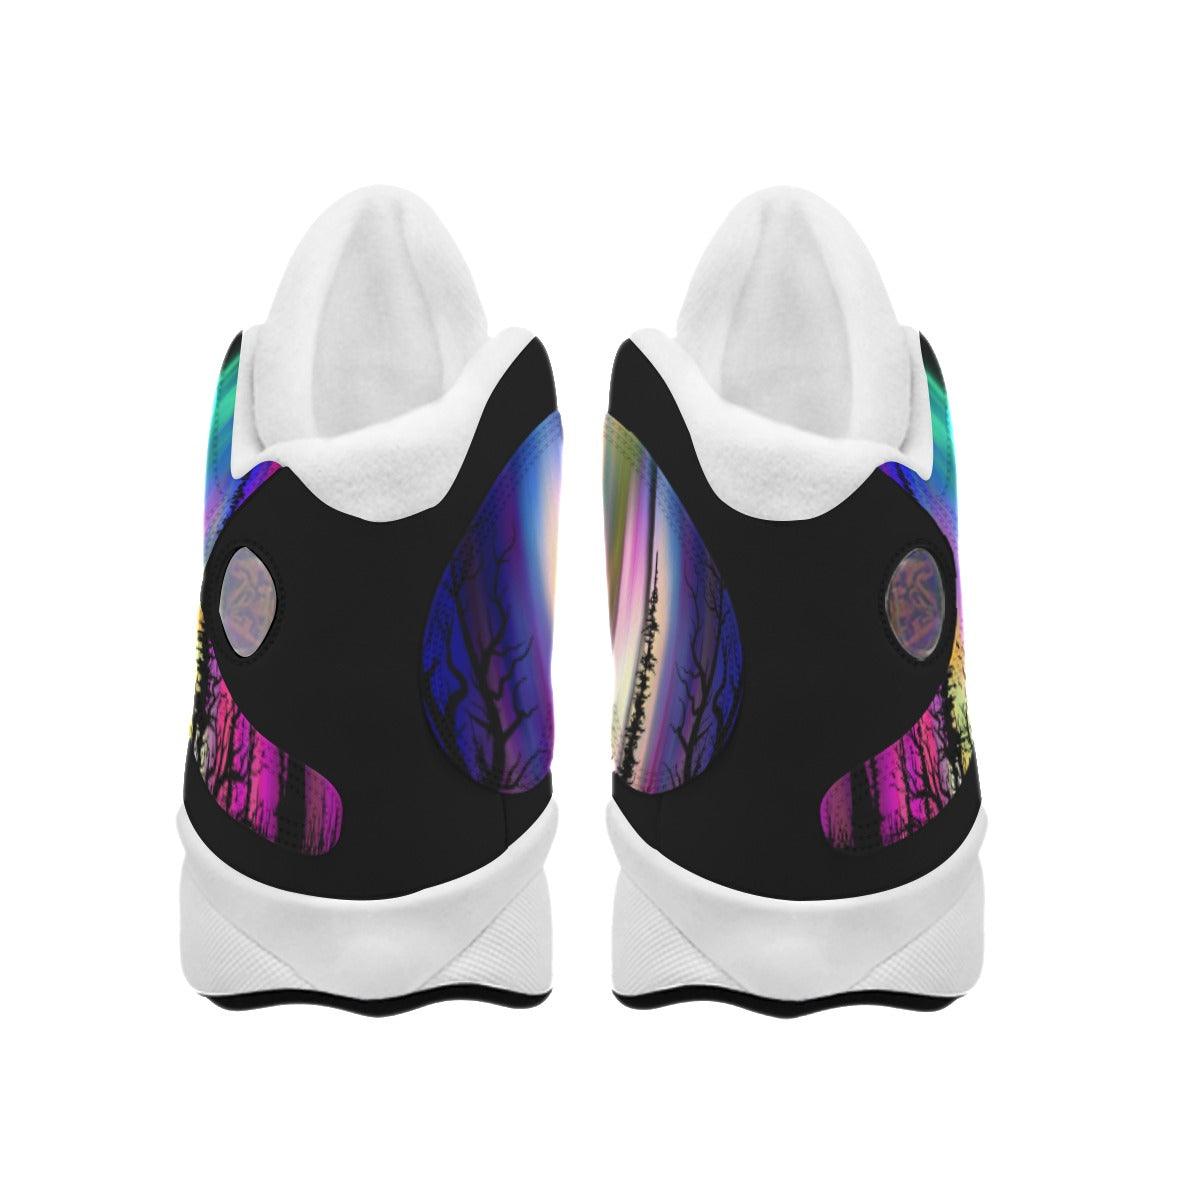 Nightmare Women's Curved Colorful Basketball Shoes Sneaker - Wonder Skull